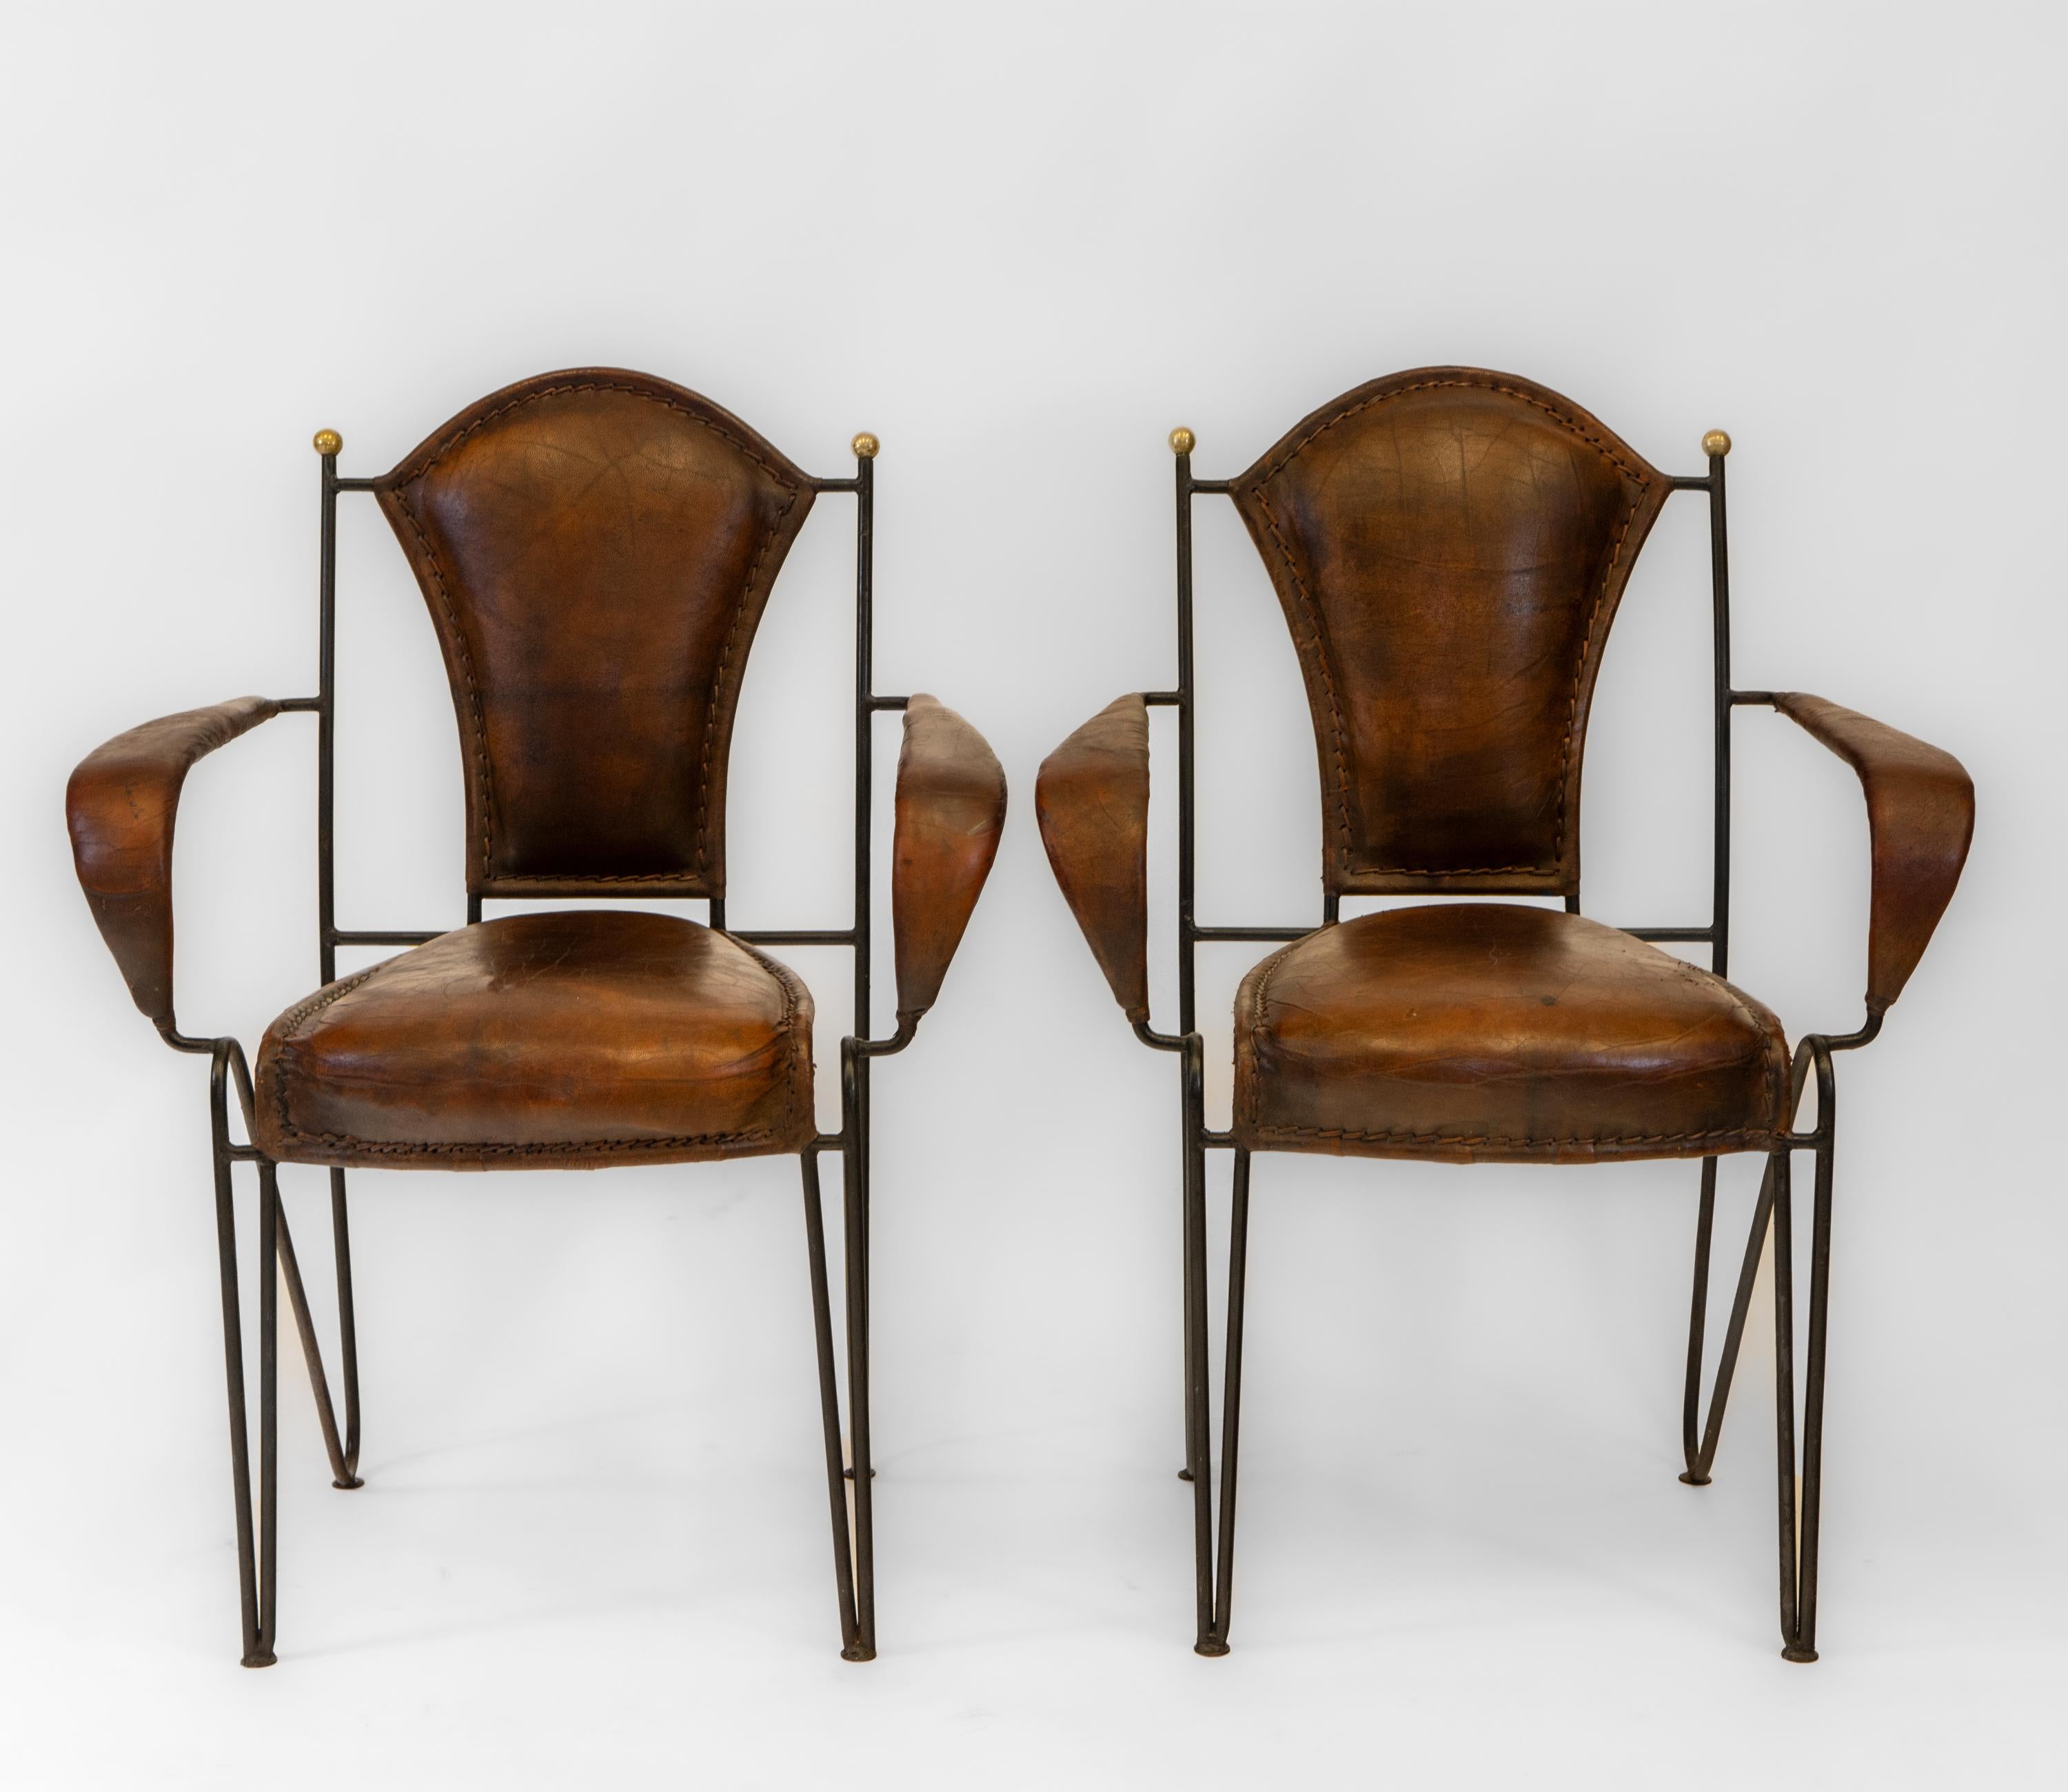 Fabulous pair of mid century French leather & iron armchairs. Circa 1950’s.

Another pair are available listed separately, also as a set of four.

The chairs have brass ball finials leading to iron sculptural frames, with hair pin legs. They boast